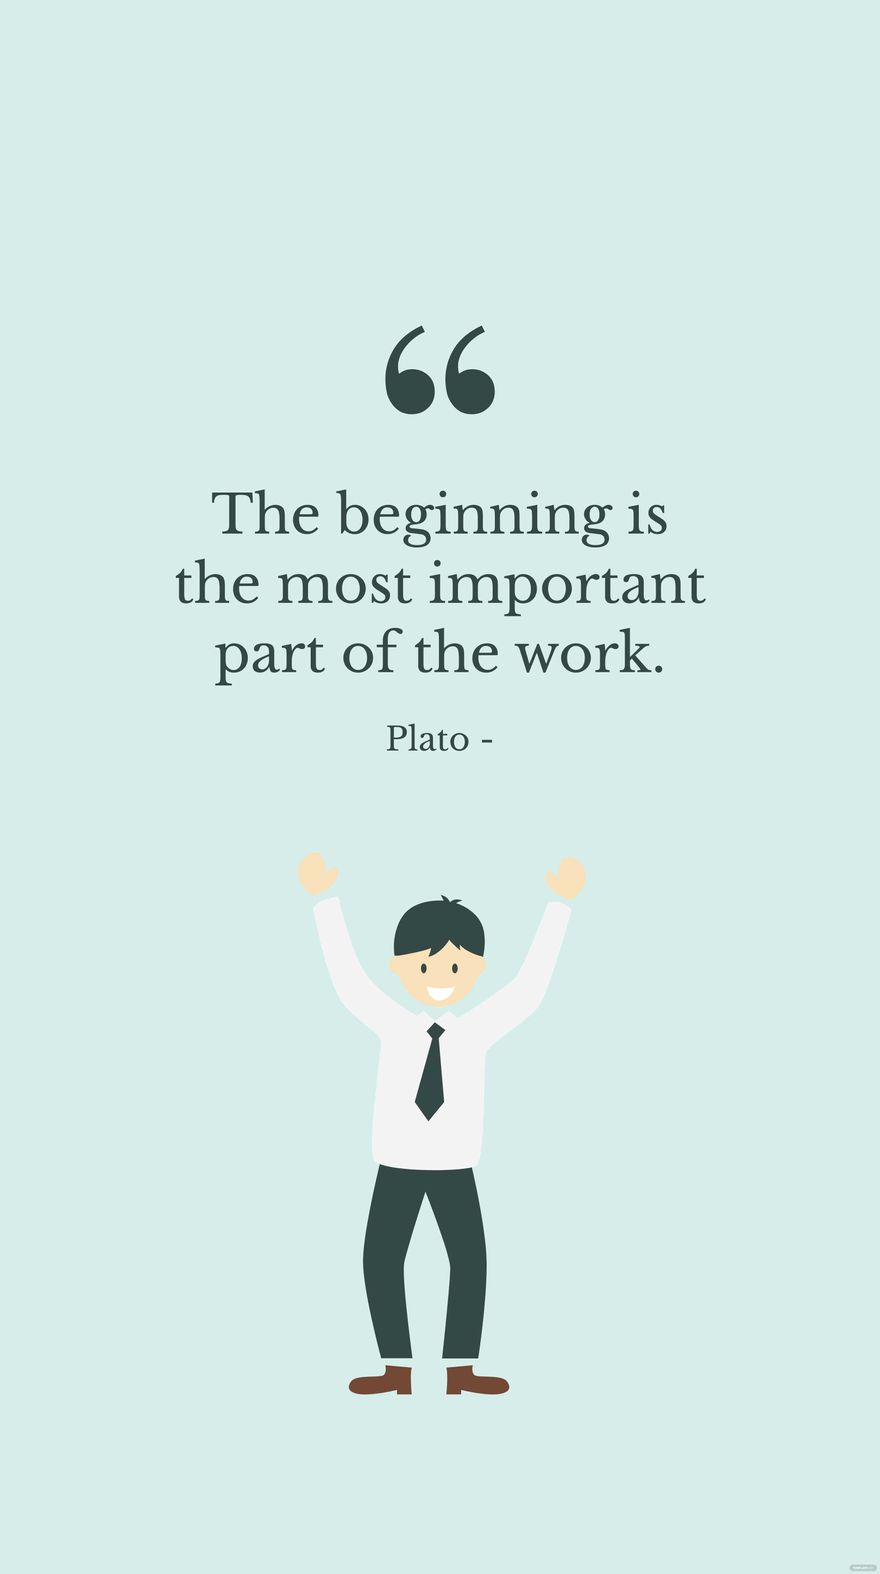 Plato - The beginning is the most important part of the work. in JPG